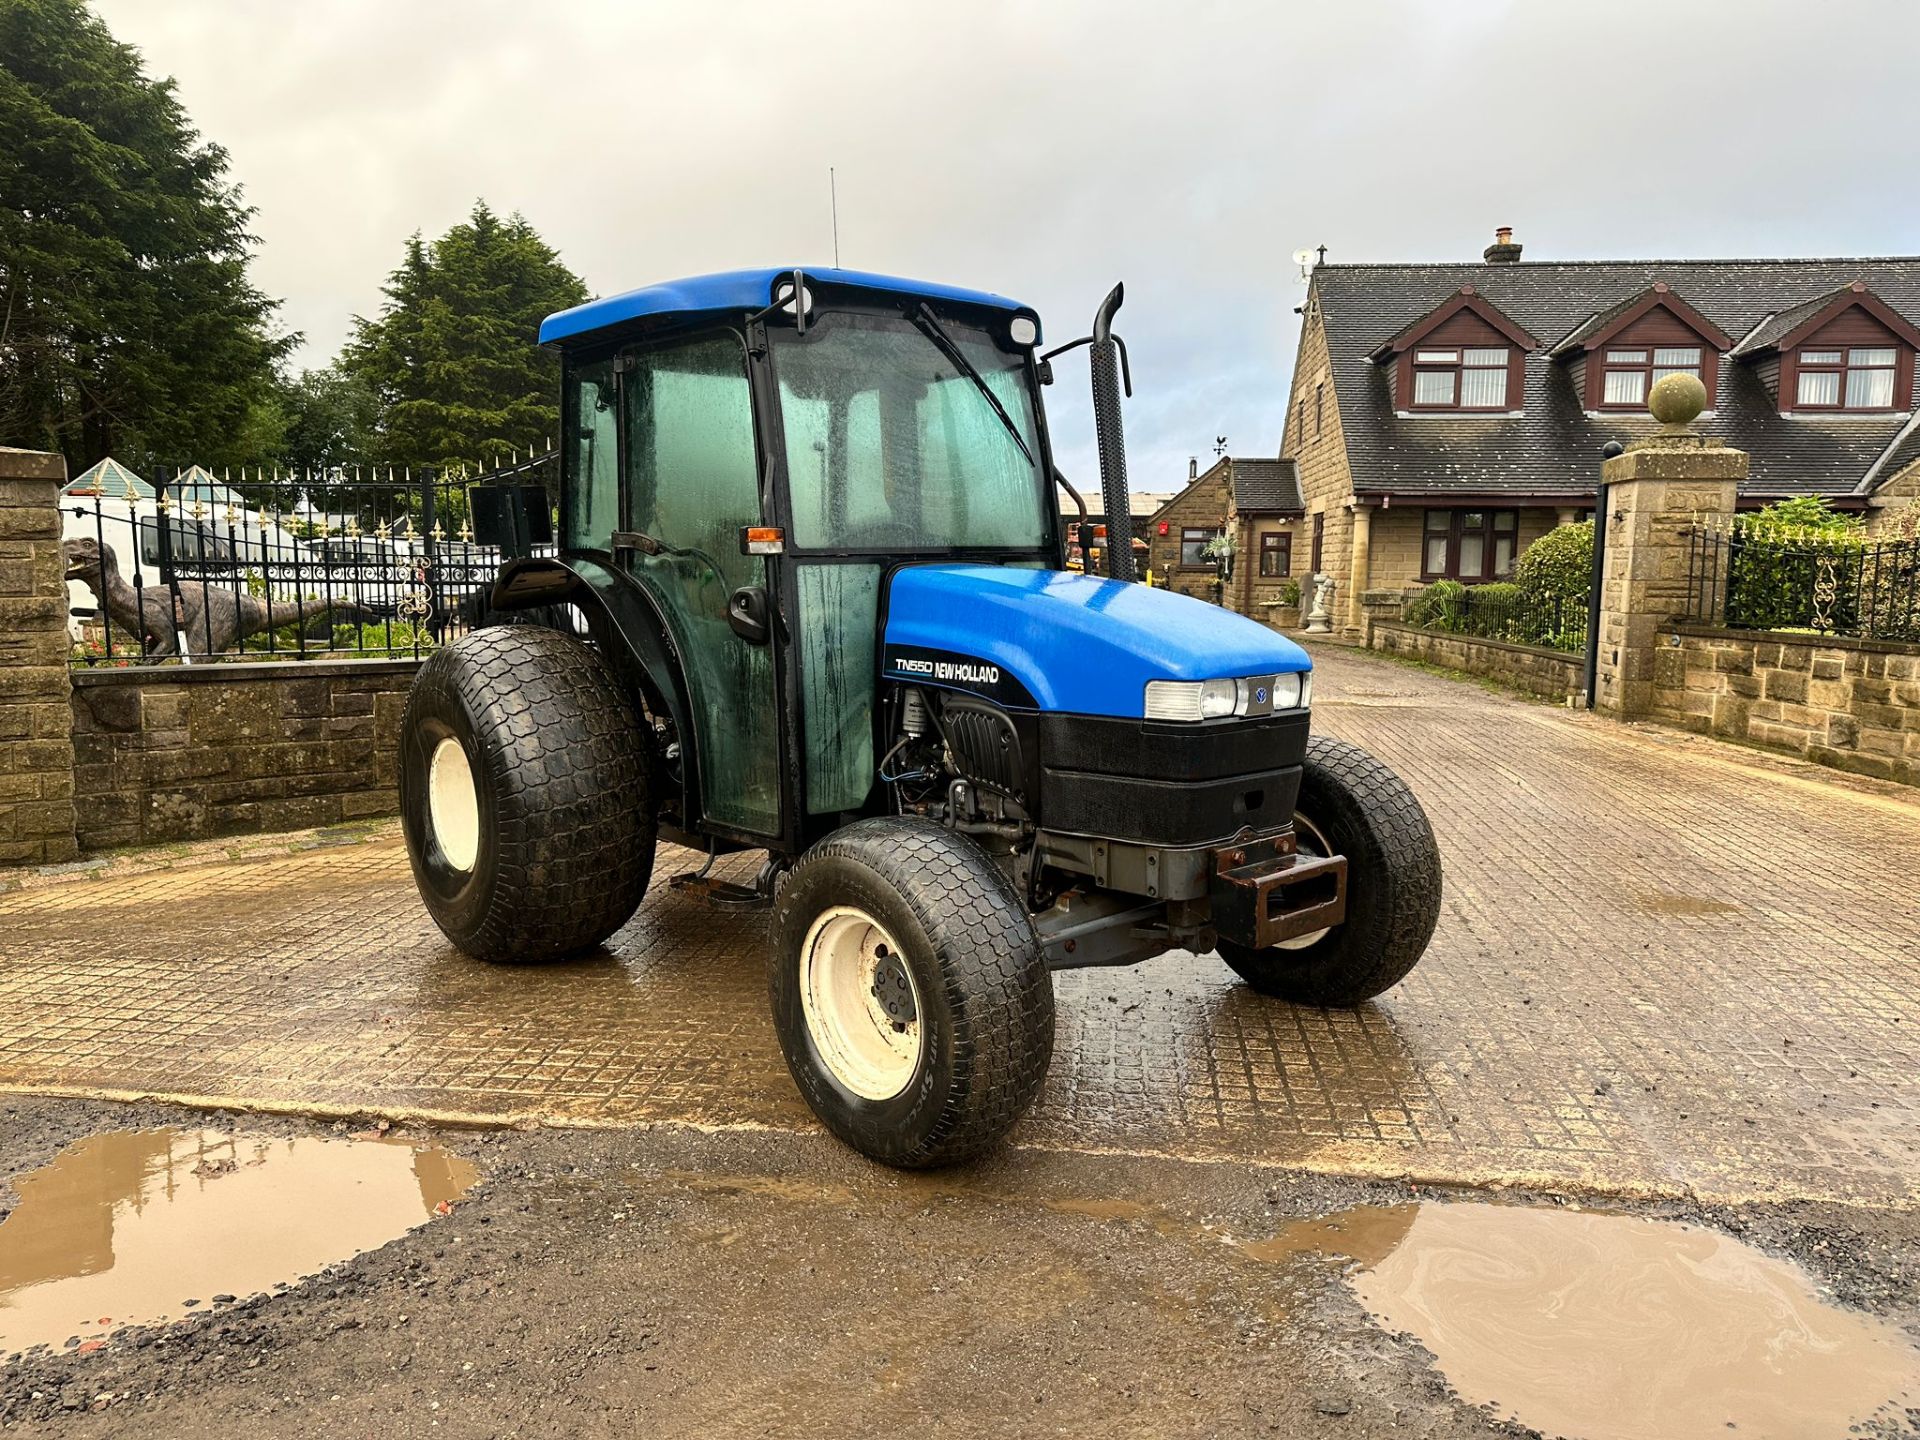 NEW HOLLAND TN55D 55HP 4WD COMPACT TRACTOR *PLUS VAT*